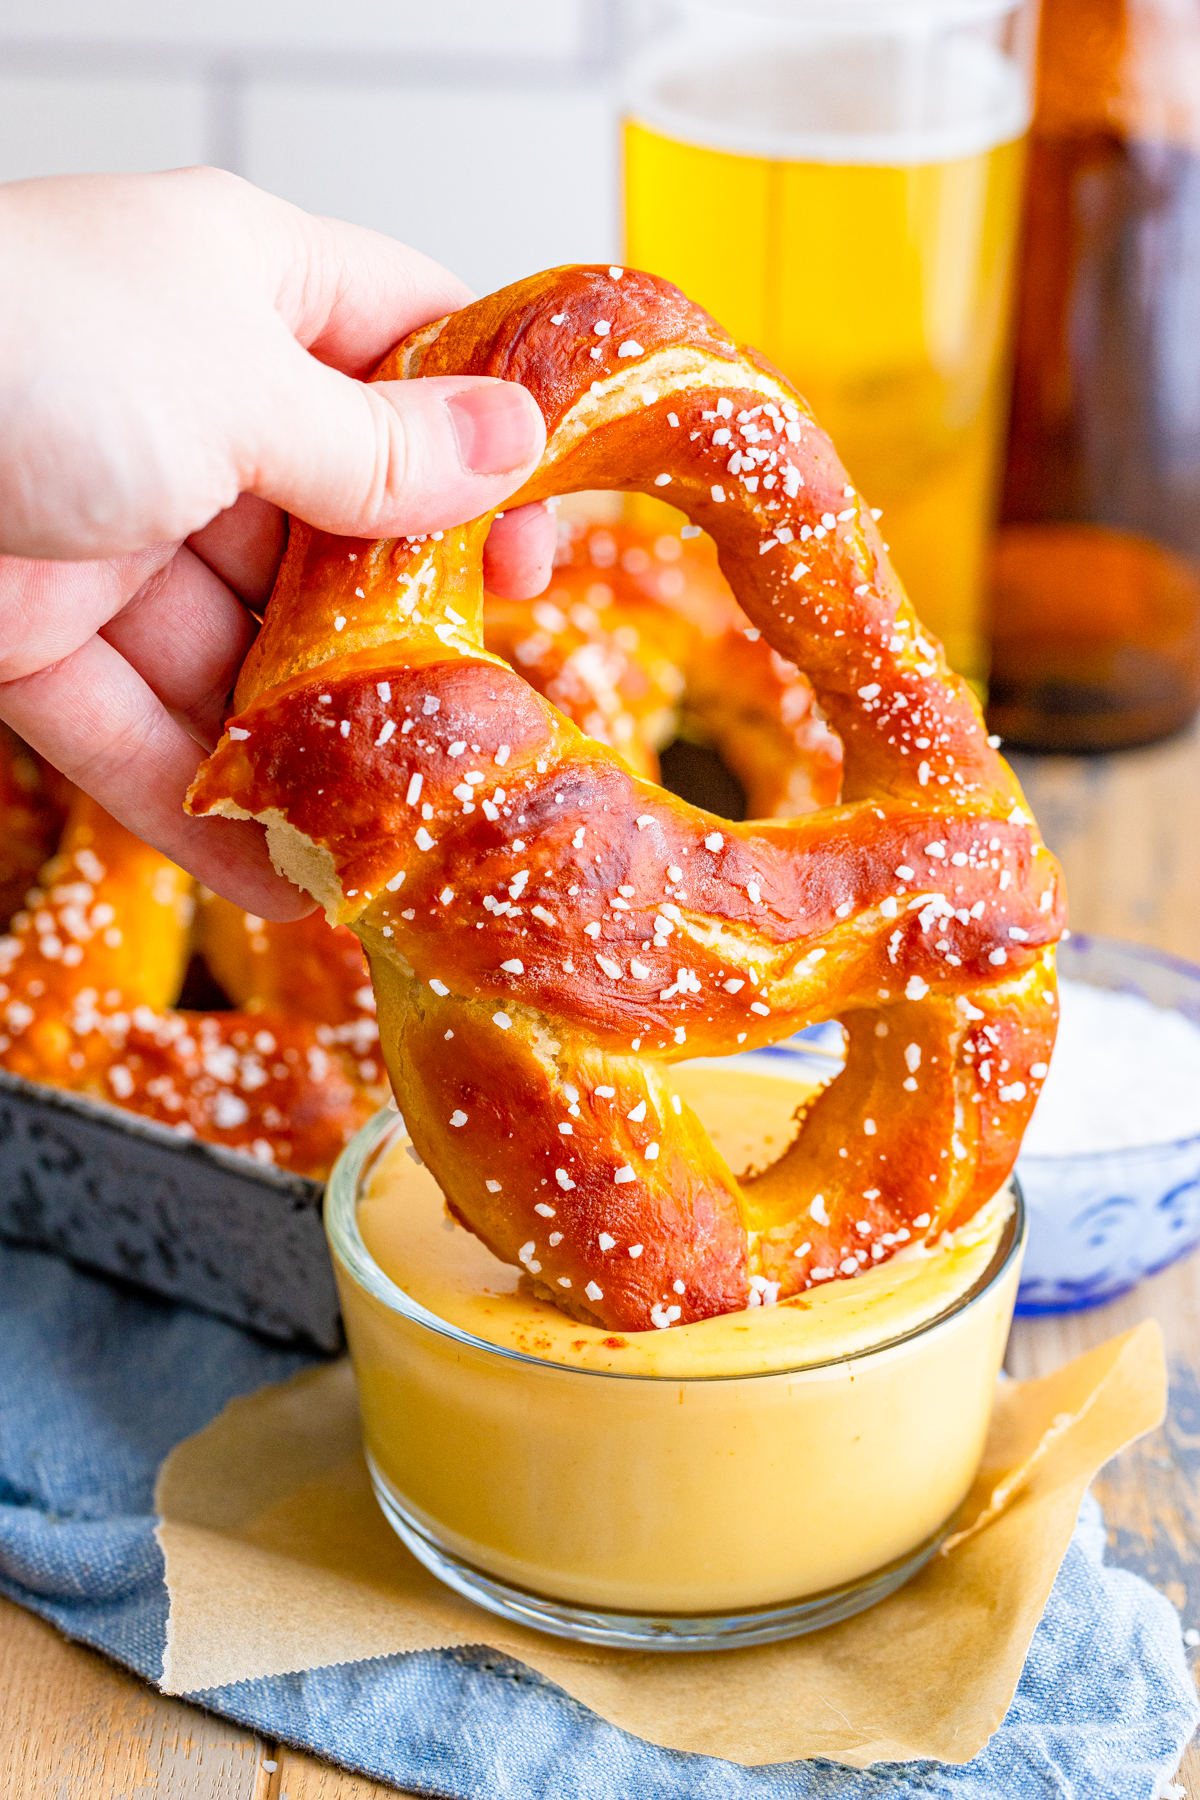 Hand dipping one Homemade Soft Pretzel into Beer Cheese Dip.